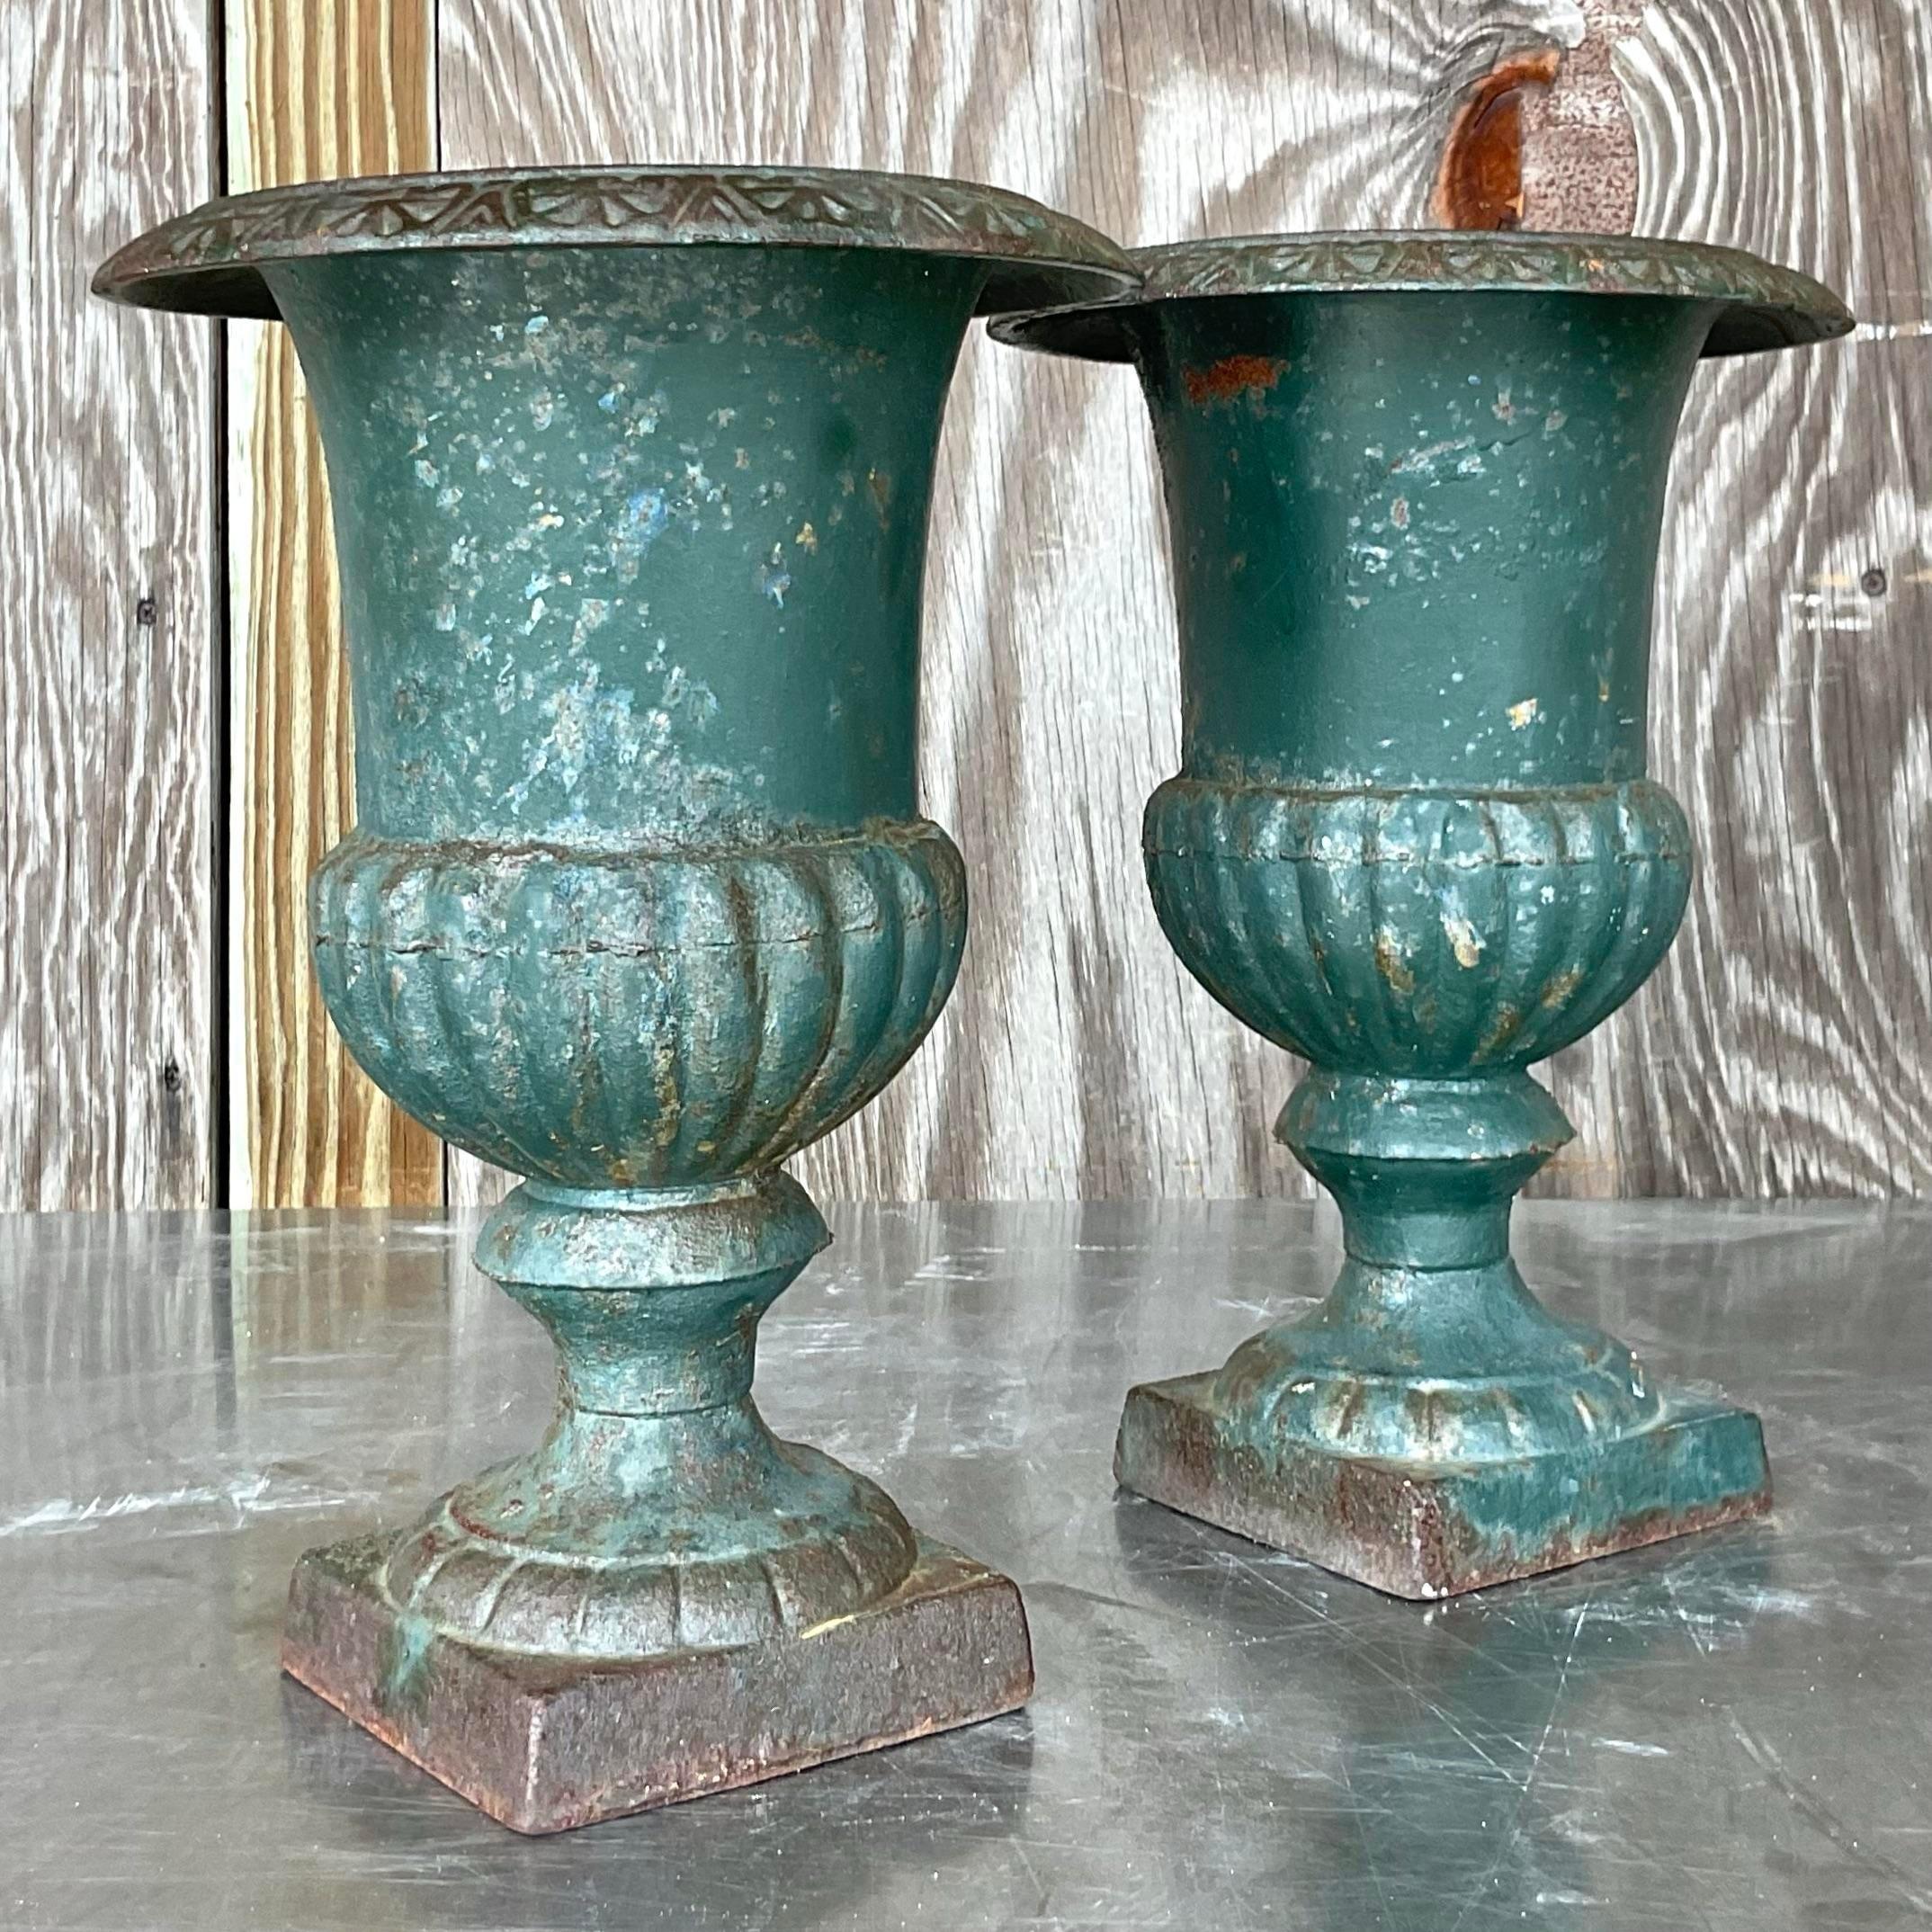 Rustic Vintage Boho Patinated Wrought Iron Urns - a Pair For Sale